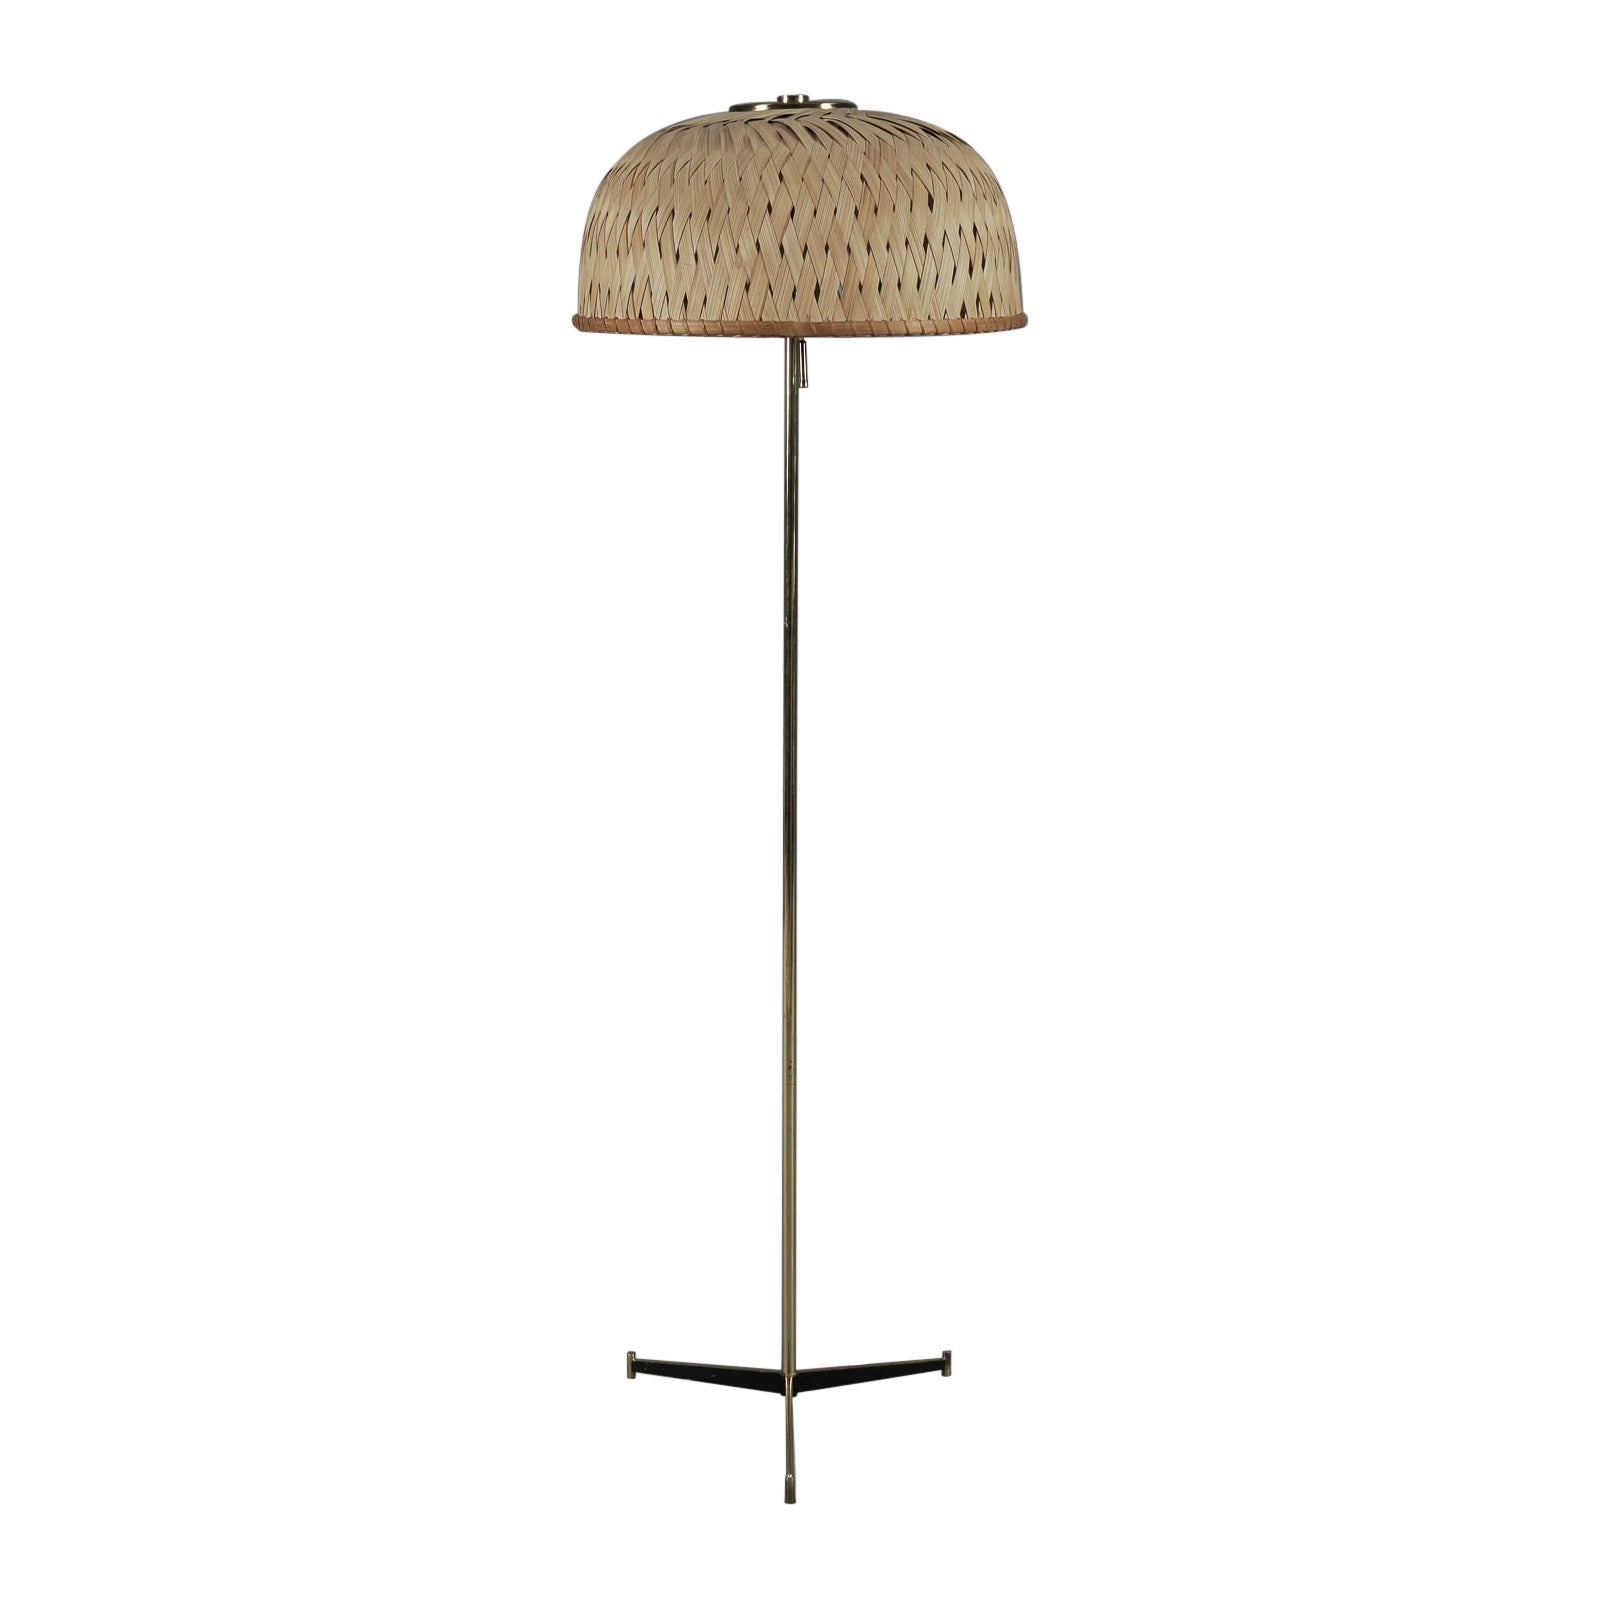 Tripod Floor Lamp in Brass and Wicker Shade, 1950s Italy For Sale